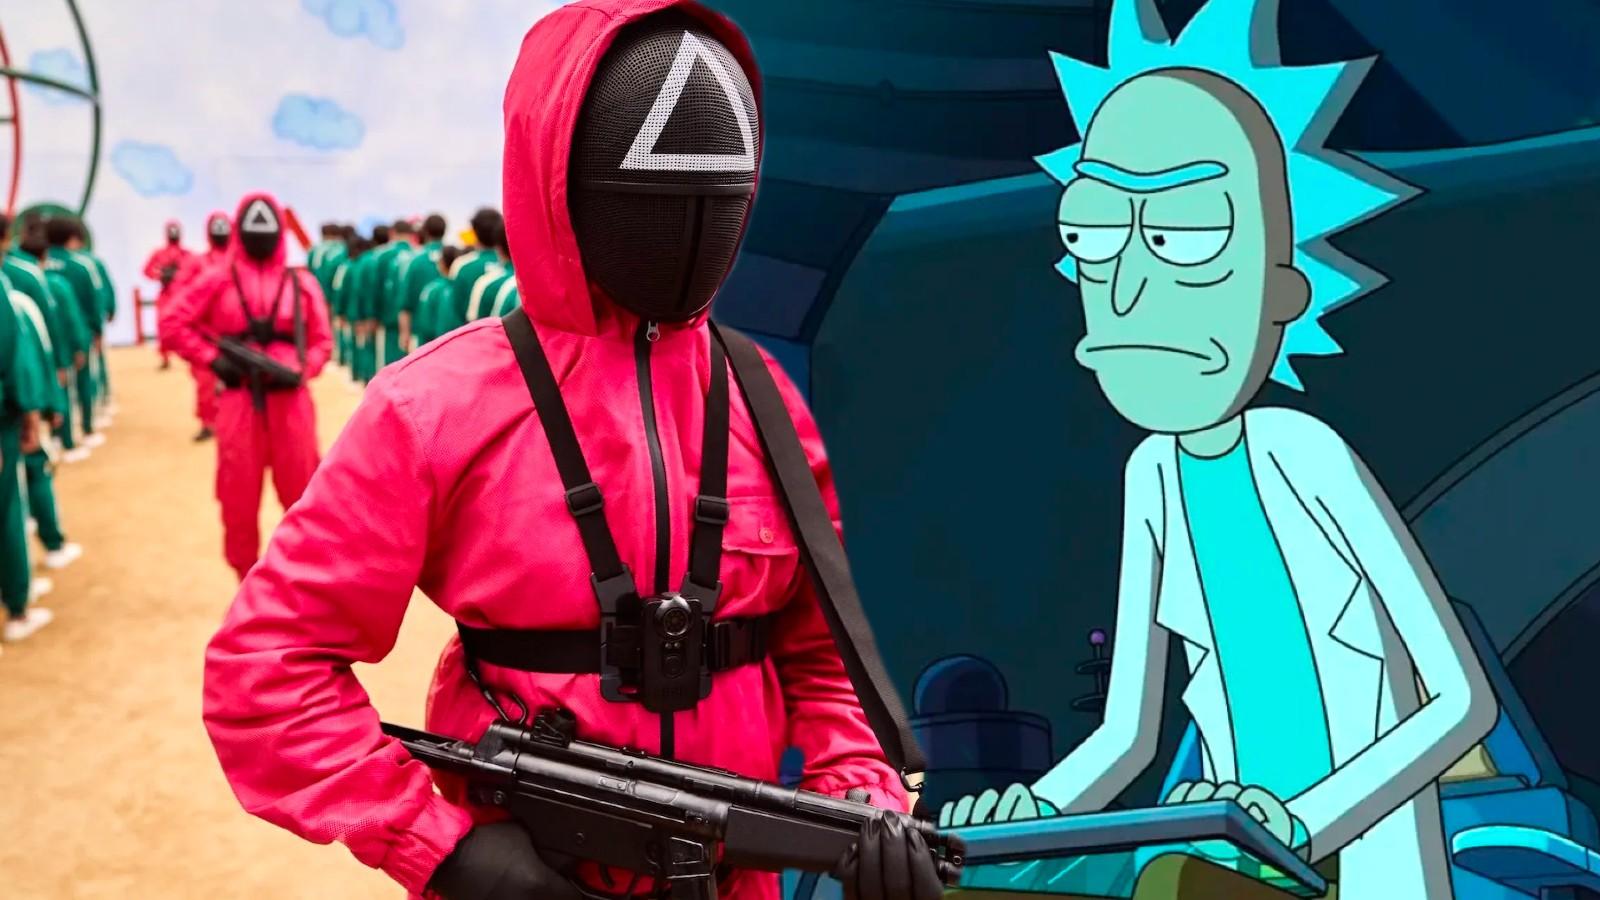 RICK AND MORTY Season 7 Episode 1 Breakdown  Easter Eggs, Things You  Missed And Ending Explained 